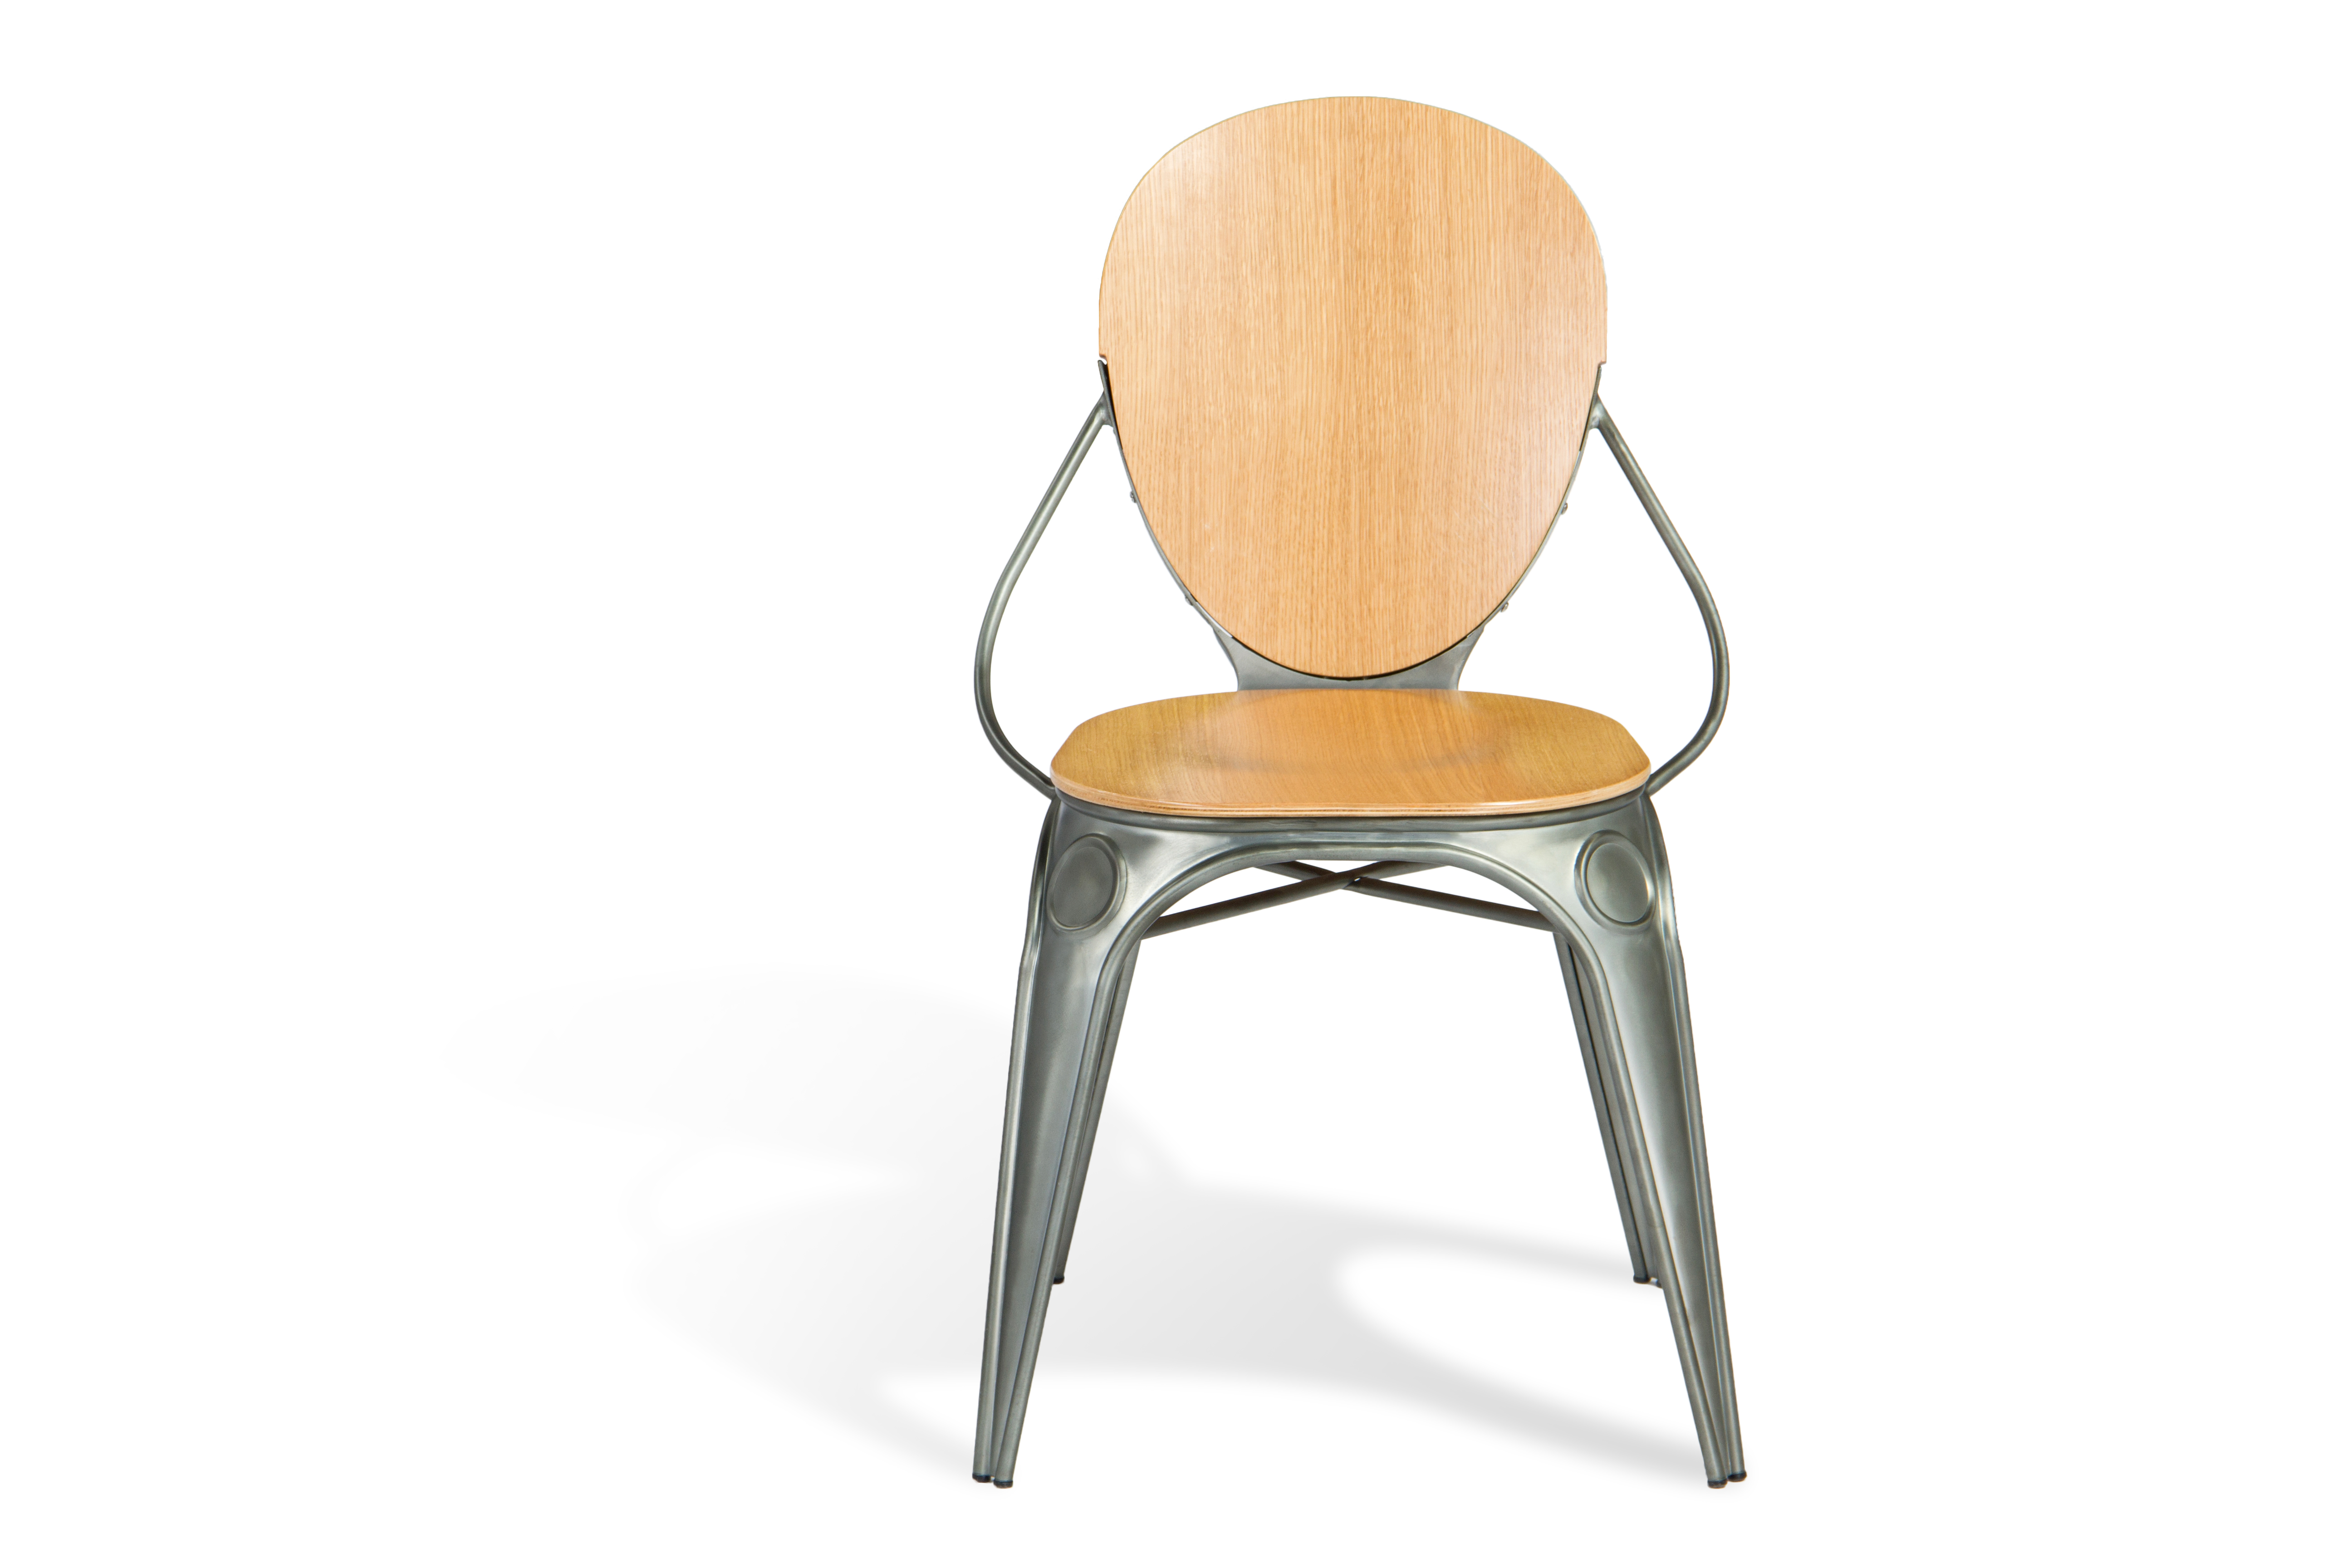 China Manufacture Metal Dining Chair with Plywood Seat Featured Image